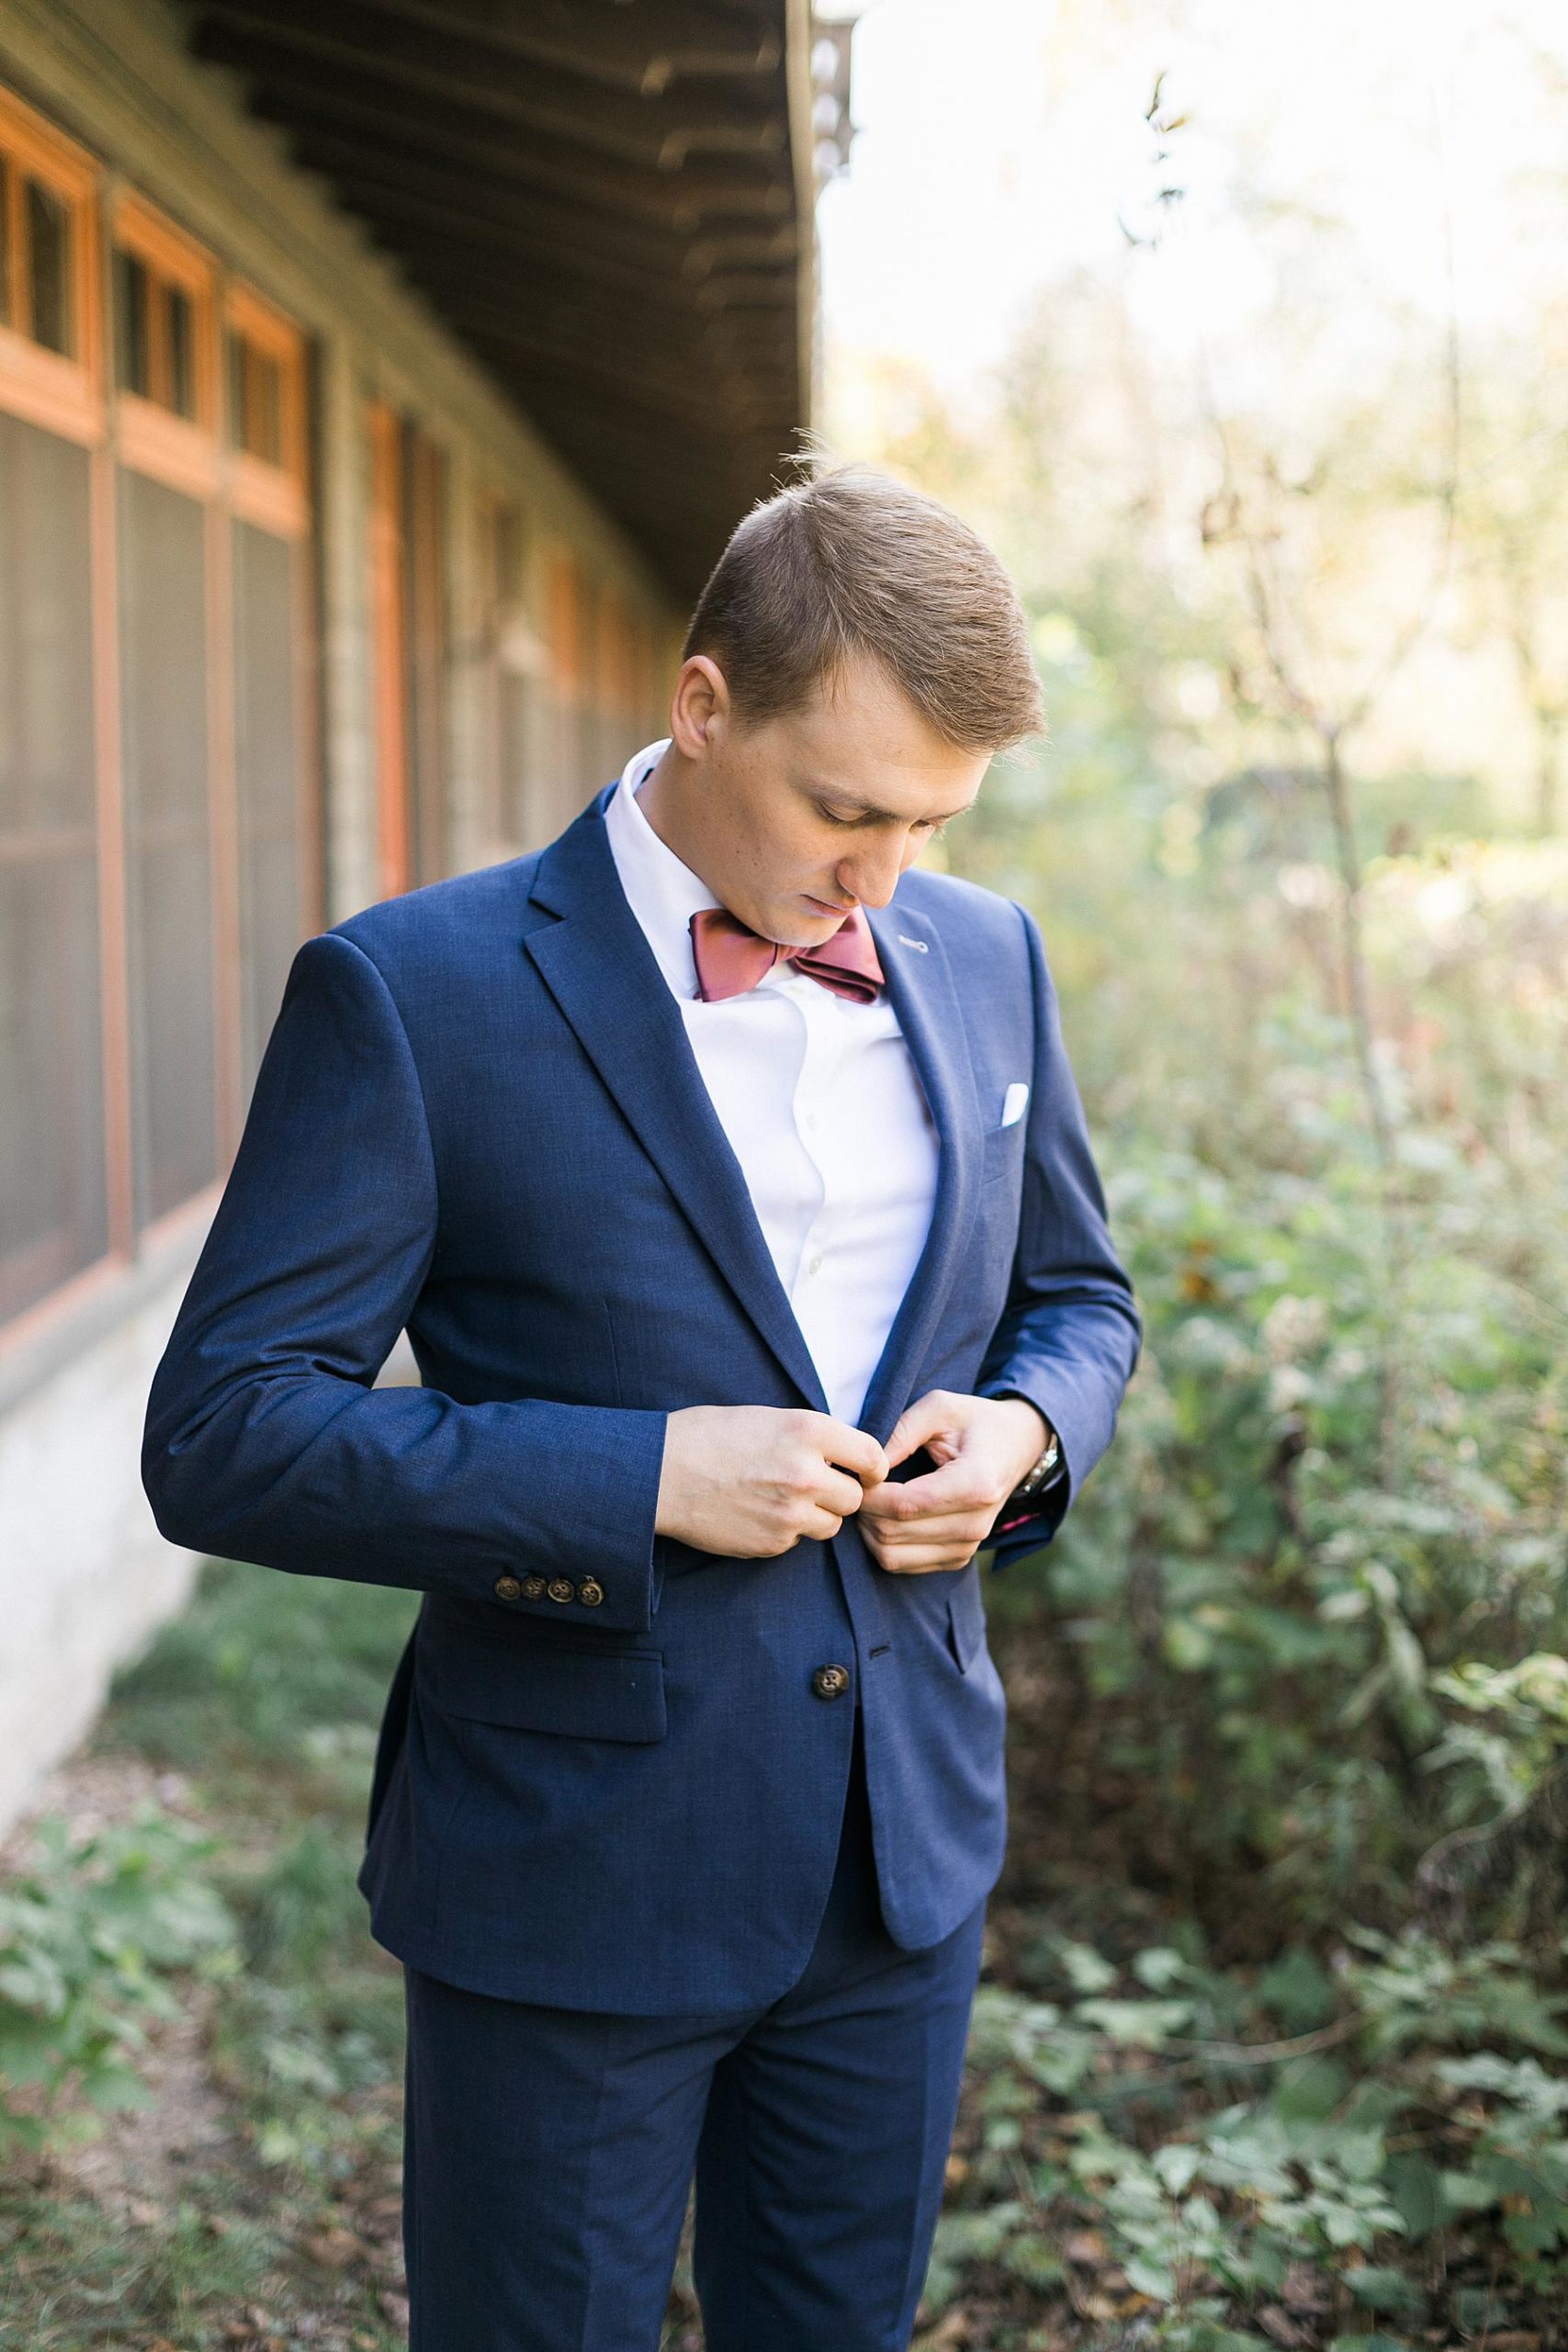 groom getting dressed getting ready in navy blue suit and red bowtie